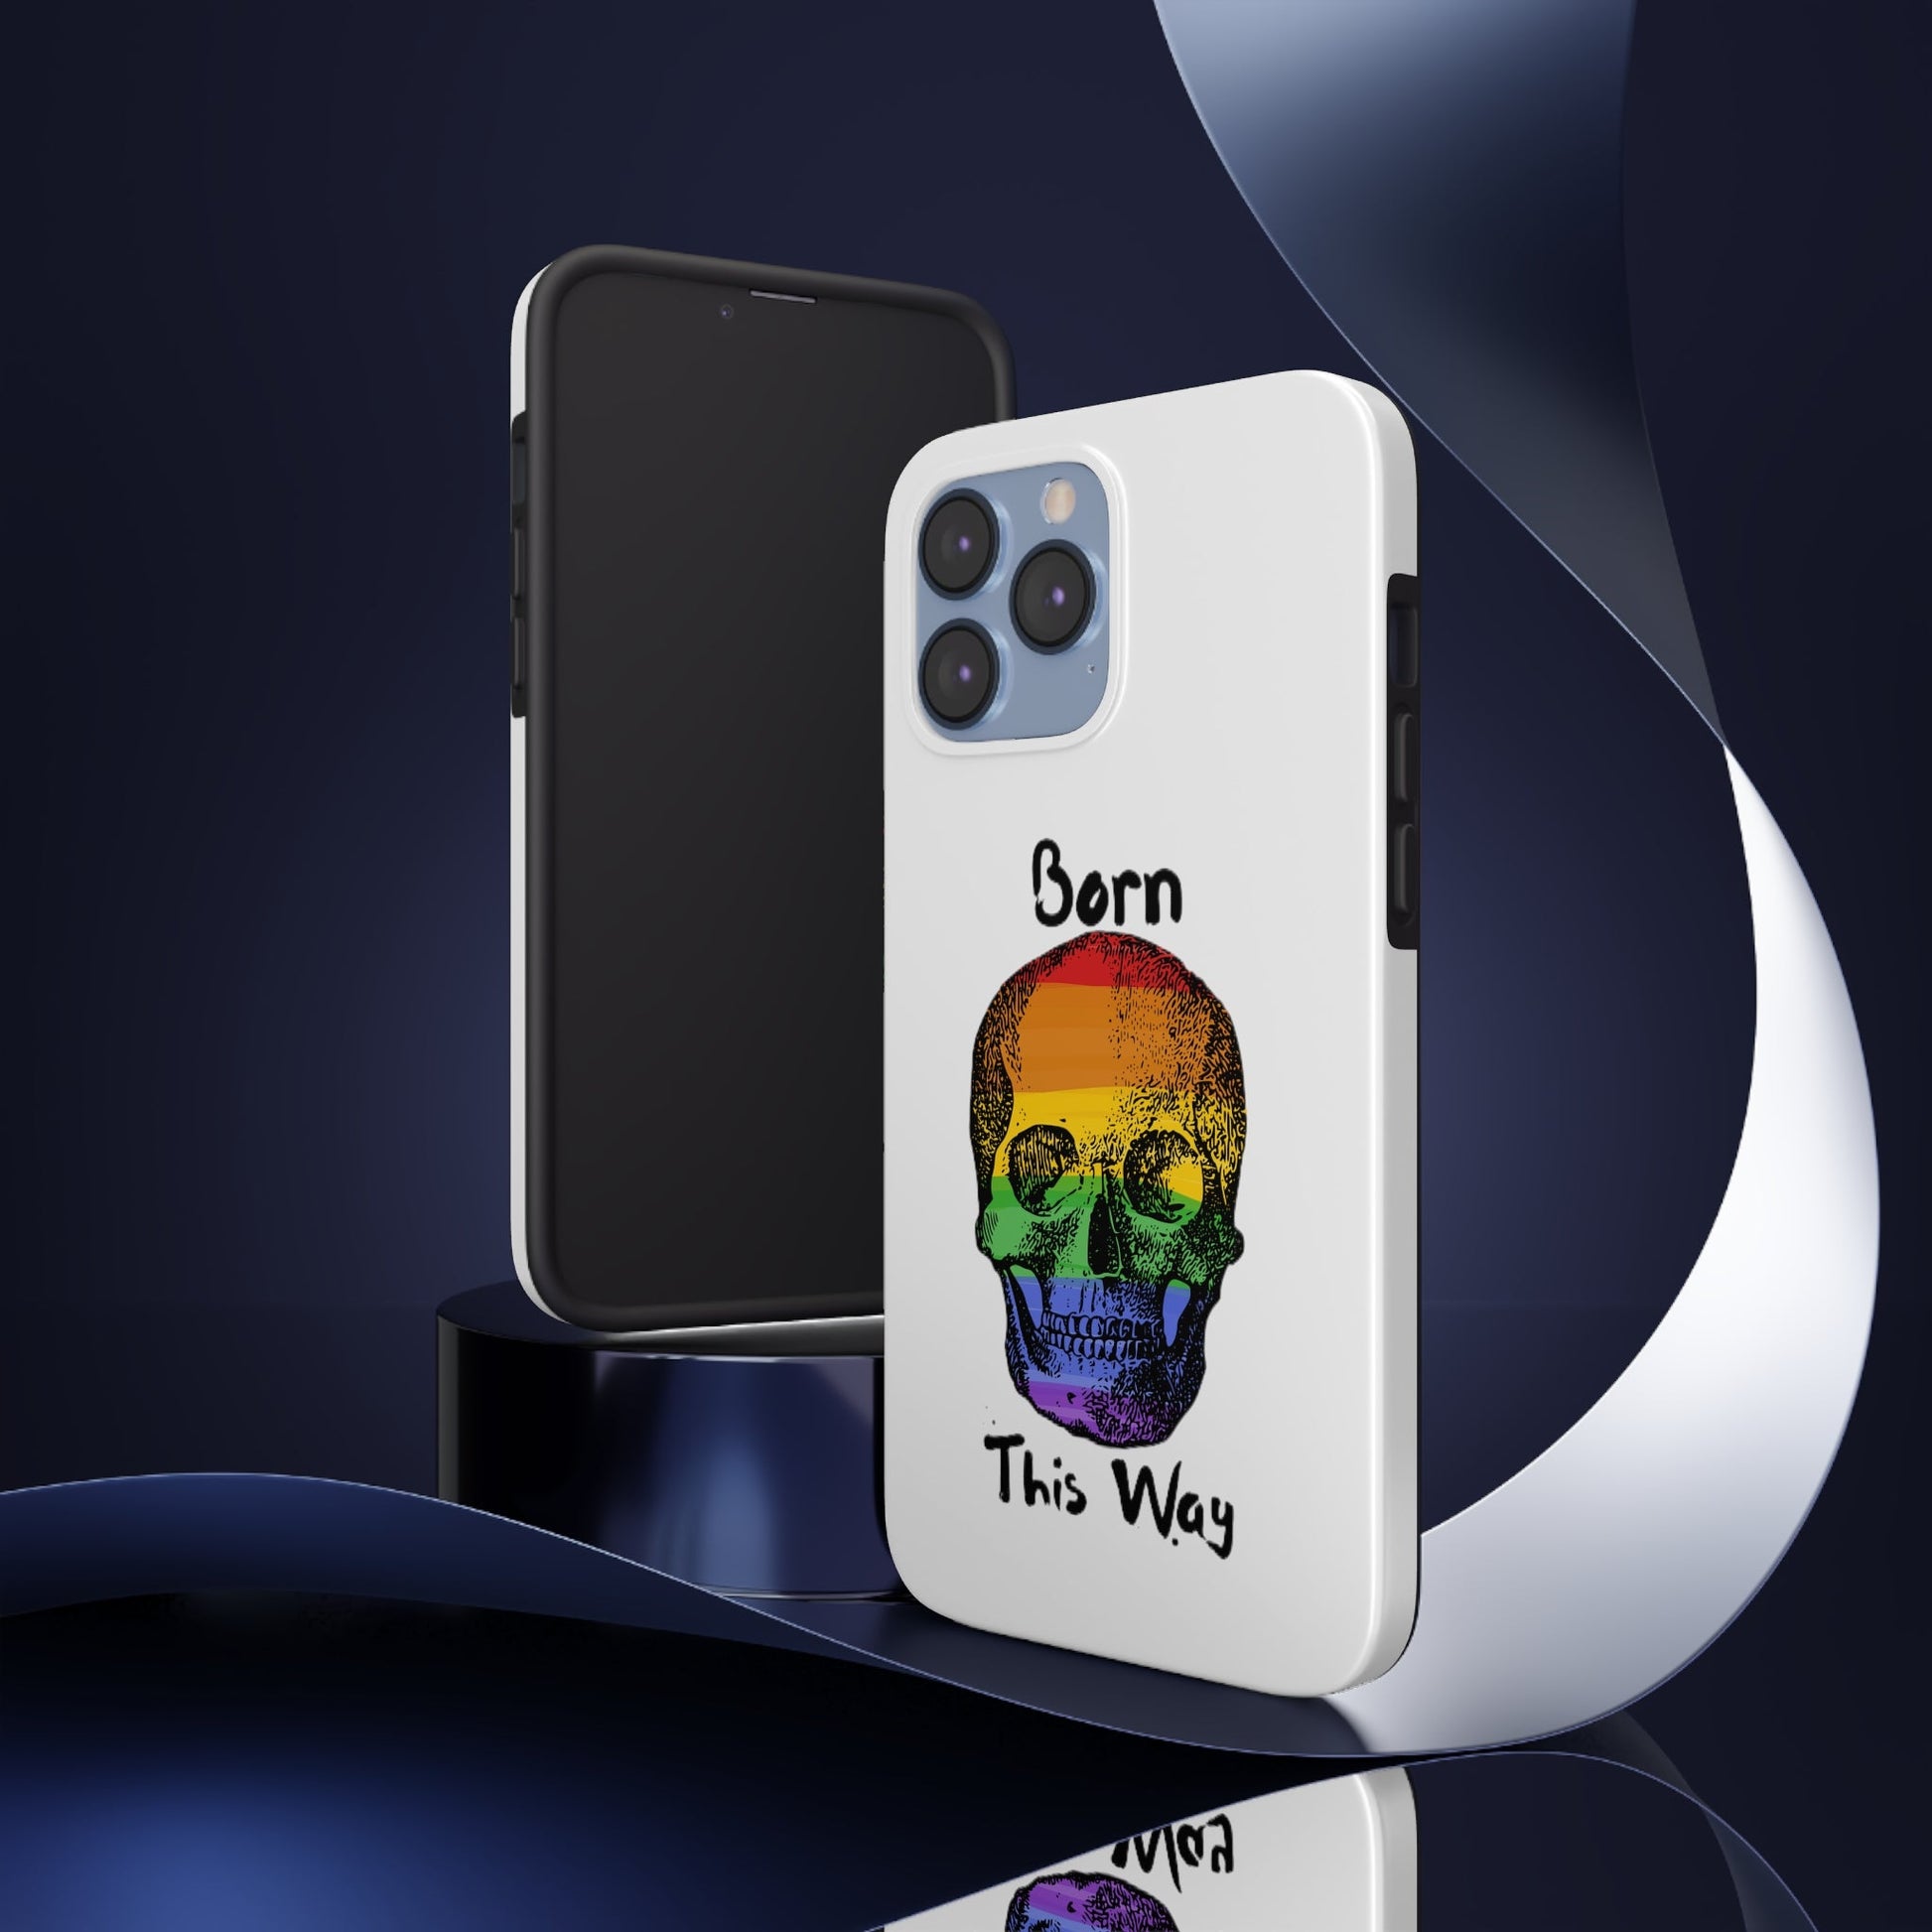 Born This Way Skeleton Pride Tough Phone Cases for iPhone 7, 8, X, 11, 12, 13, 14 and morePhone CaseVTZdesignsiPhone 13 Pro MaxAccessoriesGlossyiPhone Cases